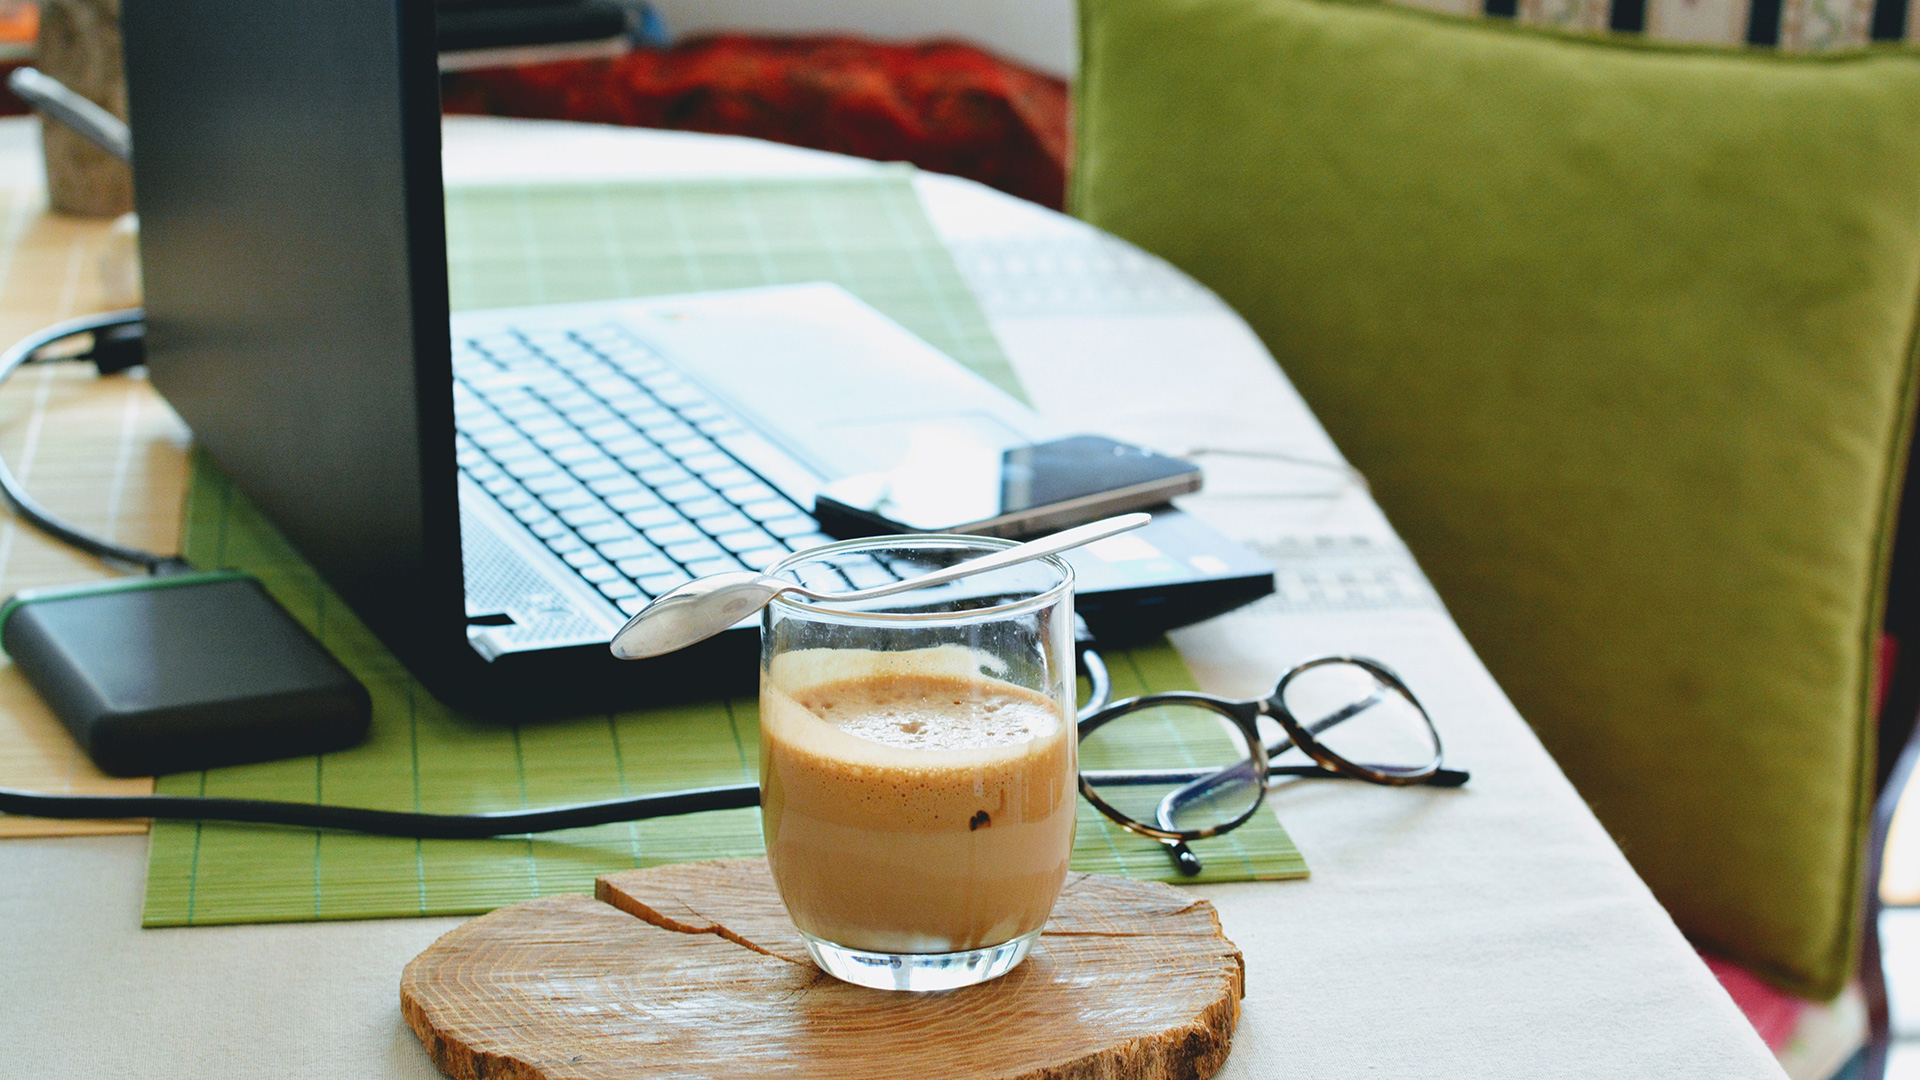 Desk with laptop, iced coffee, and glasses